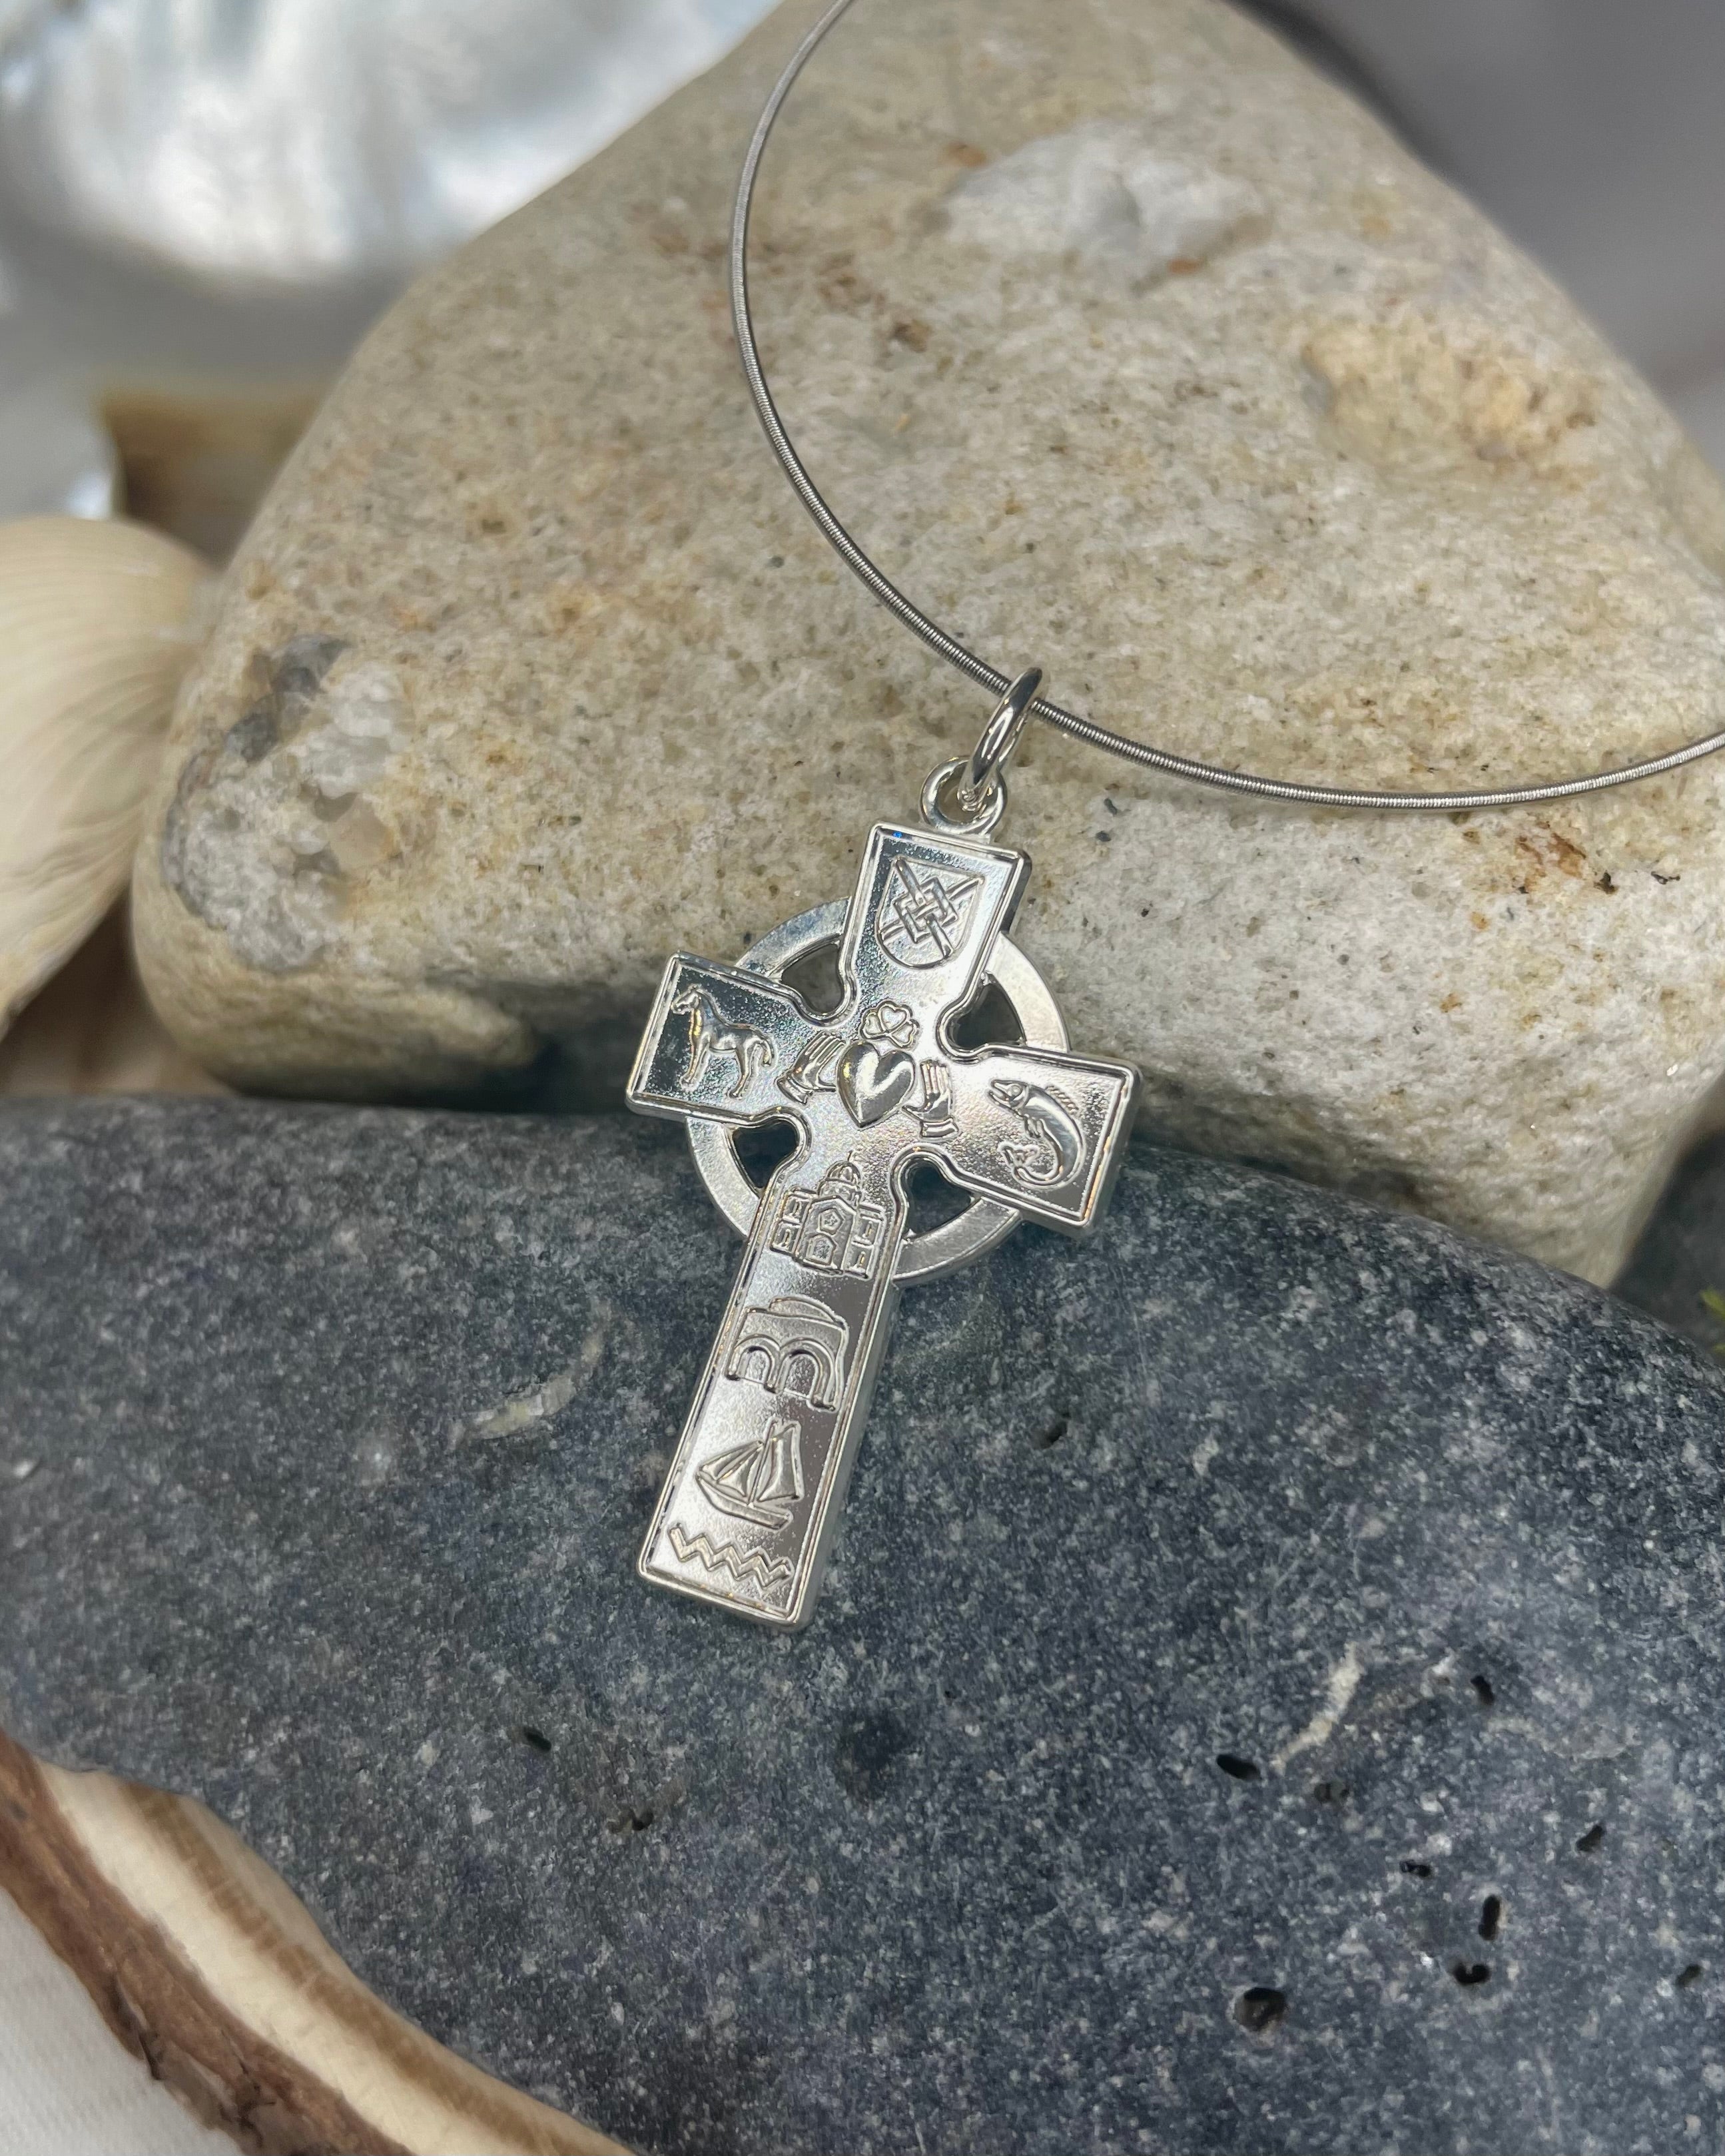 AUSSTO Stainless Steel Celtic Cross Necklace for Men, Double Sided Celtic  Cross Irish Knot Prayer Pendent Necklace with Box Chain | Amazon.com